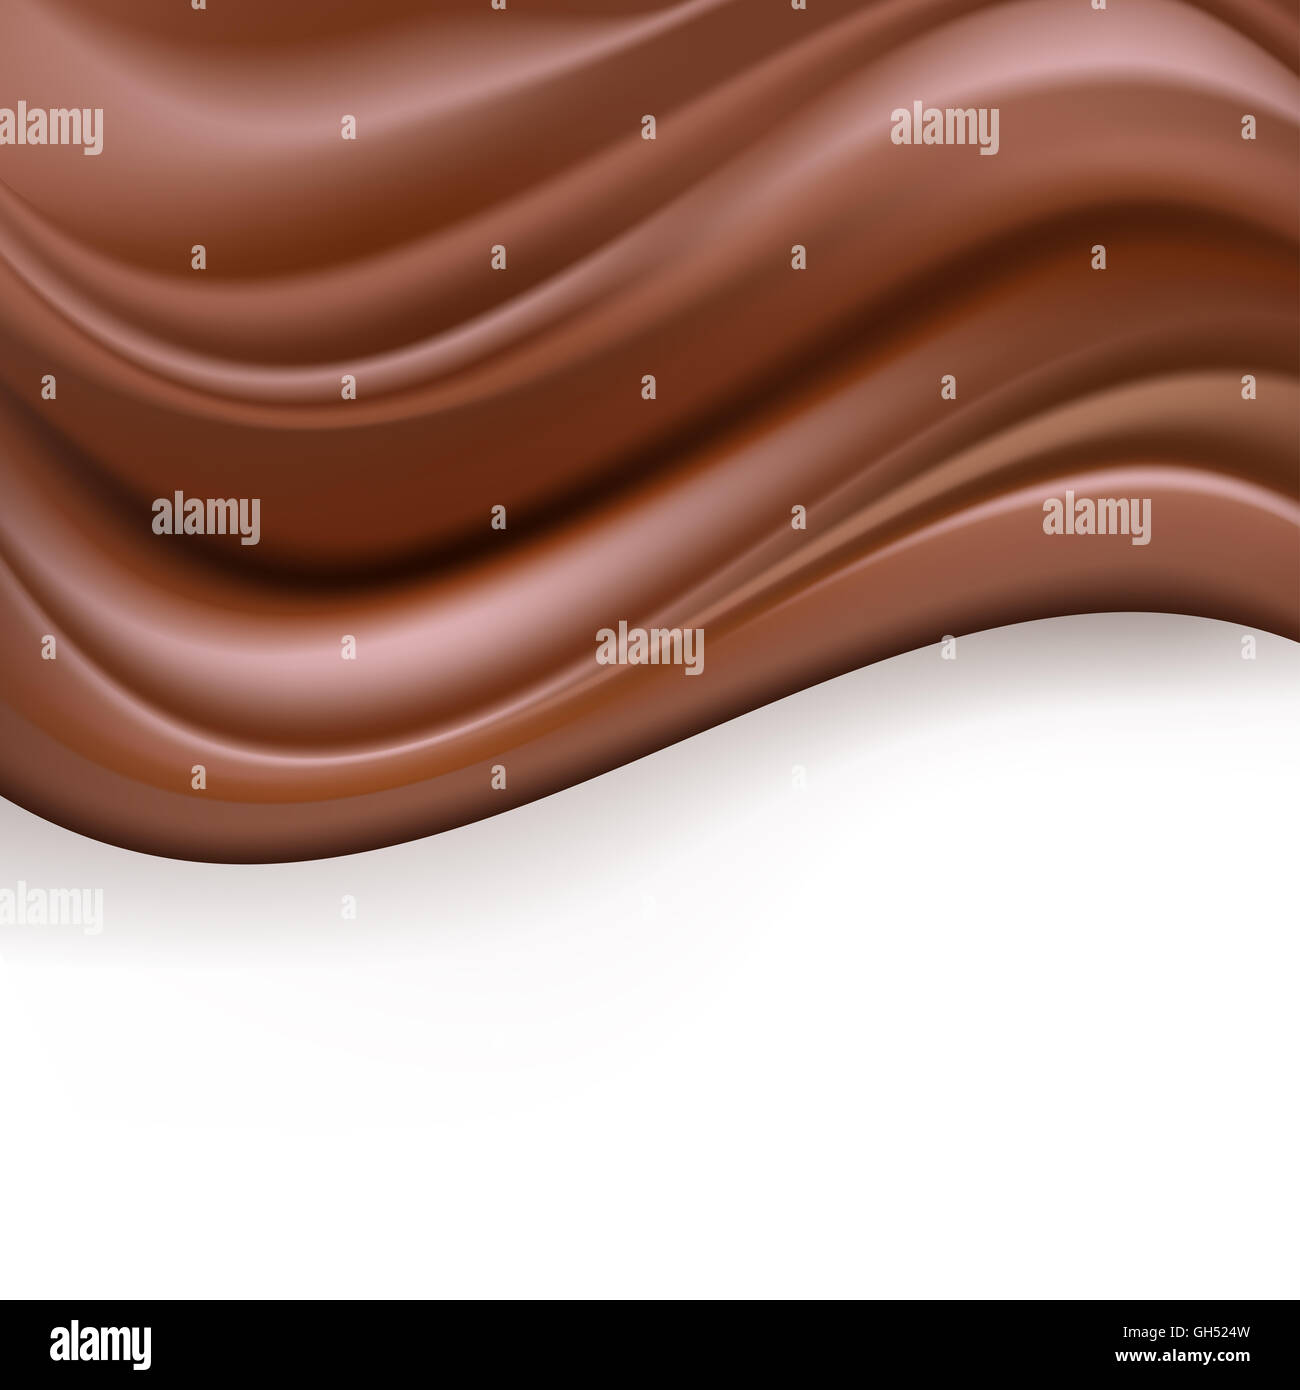 abstract background with creamy chocolate waves on white Stock Photo